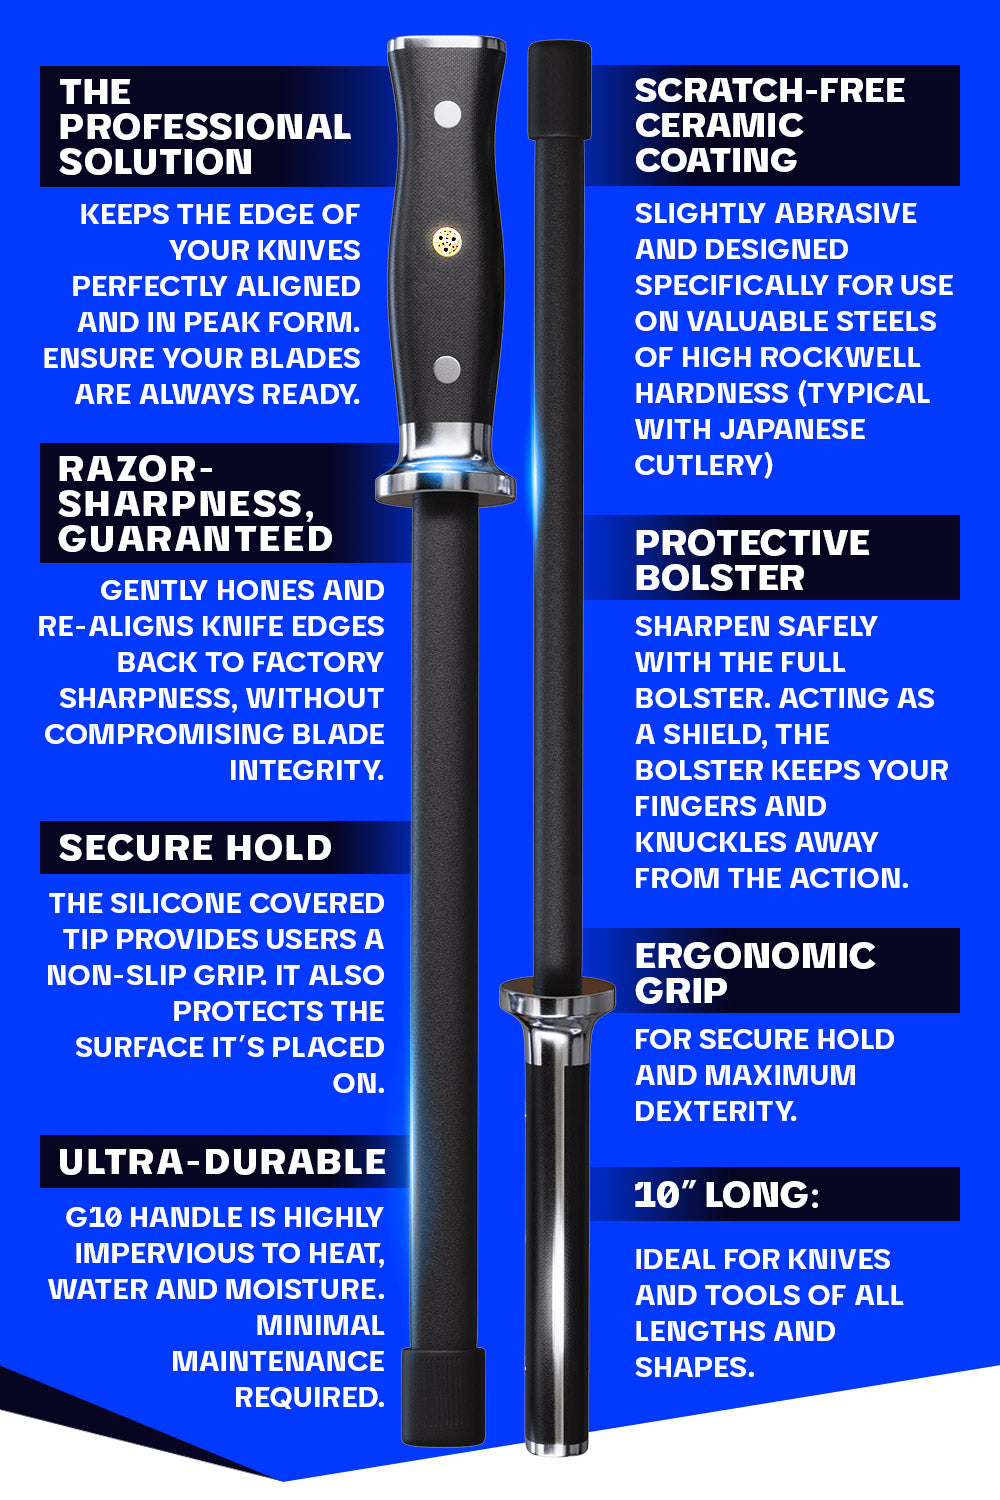 Dalstrong 10 inch honing rod with ceramic coating specification.